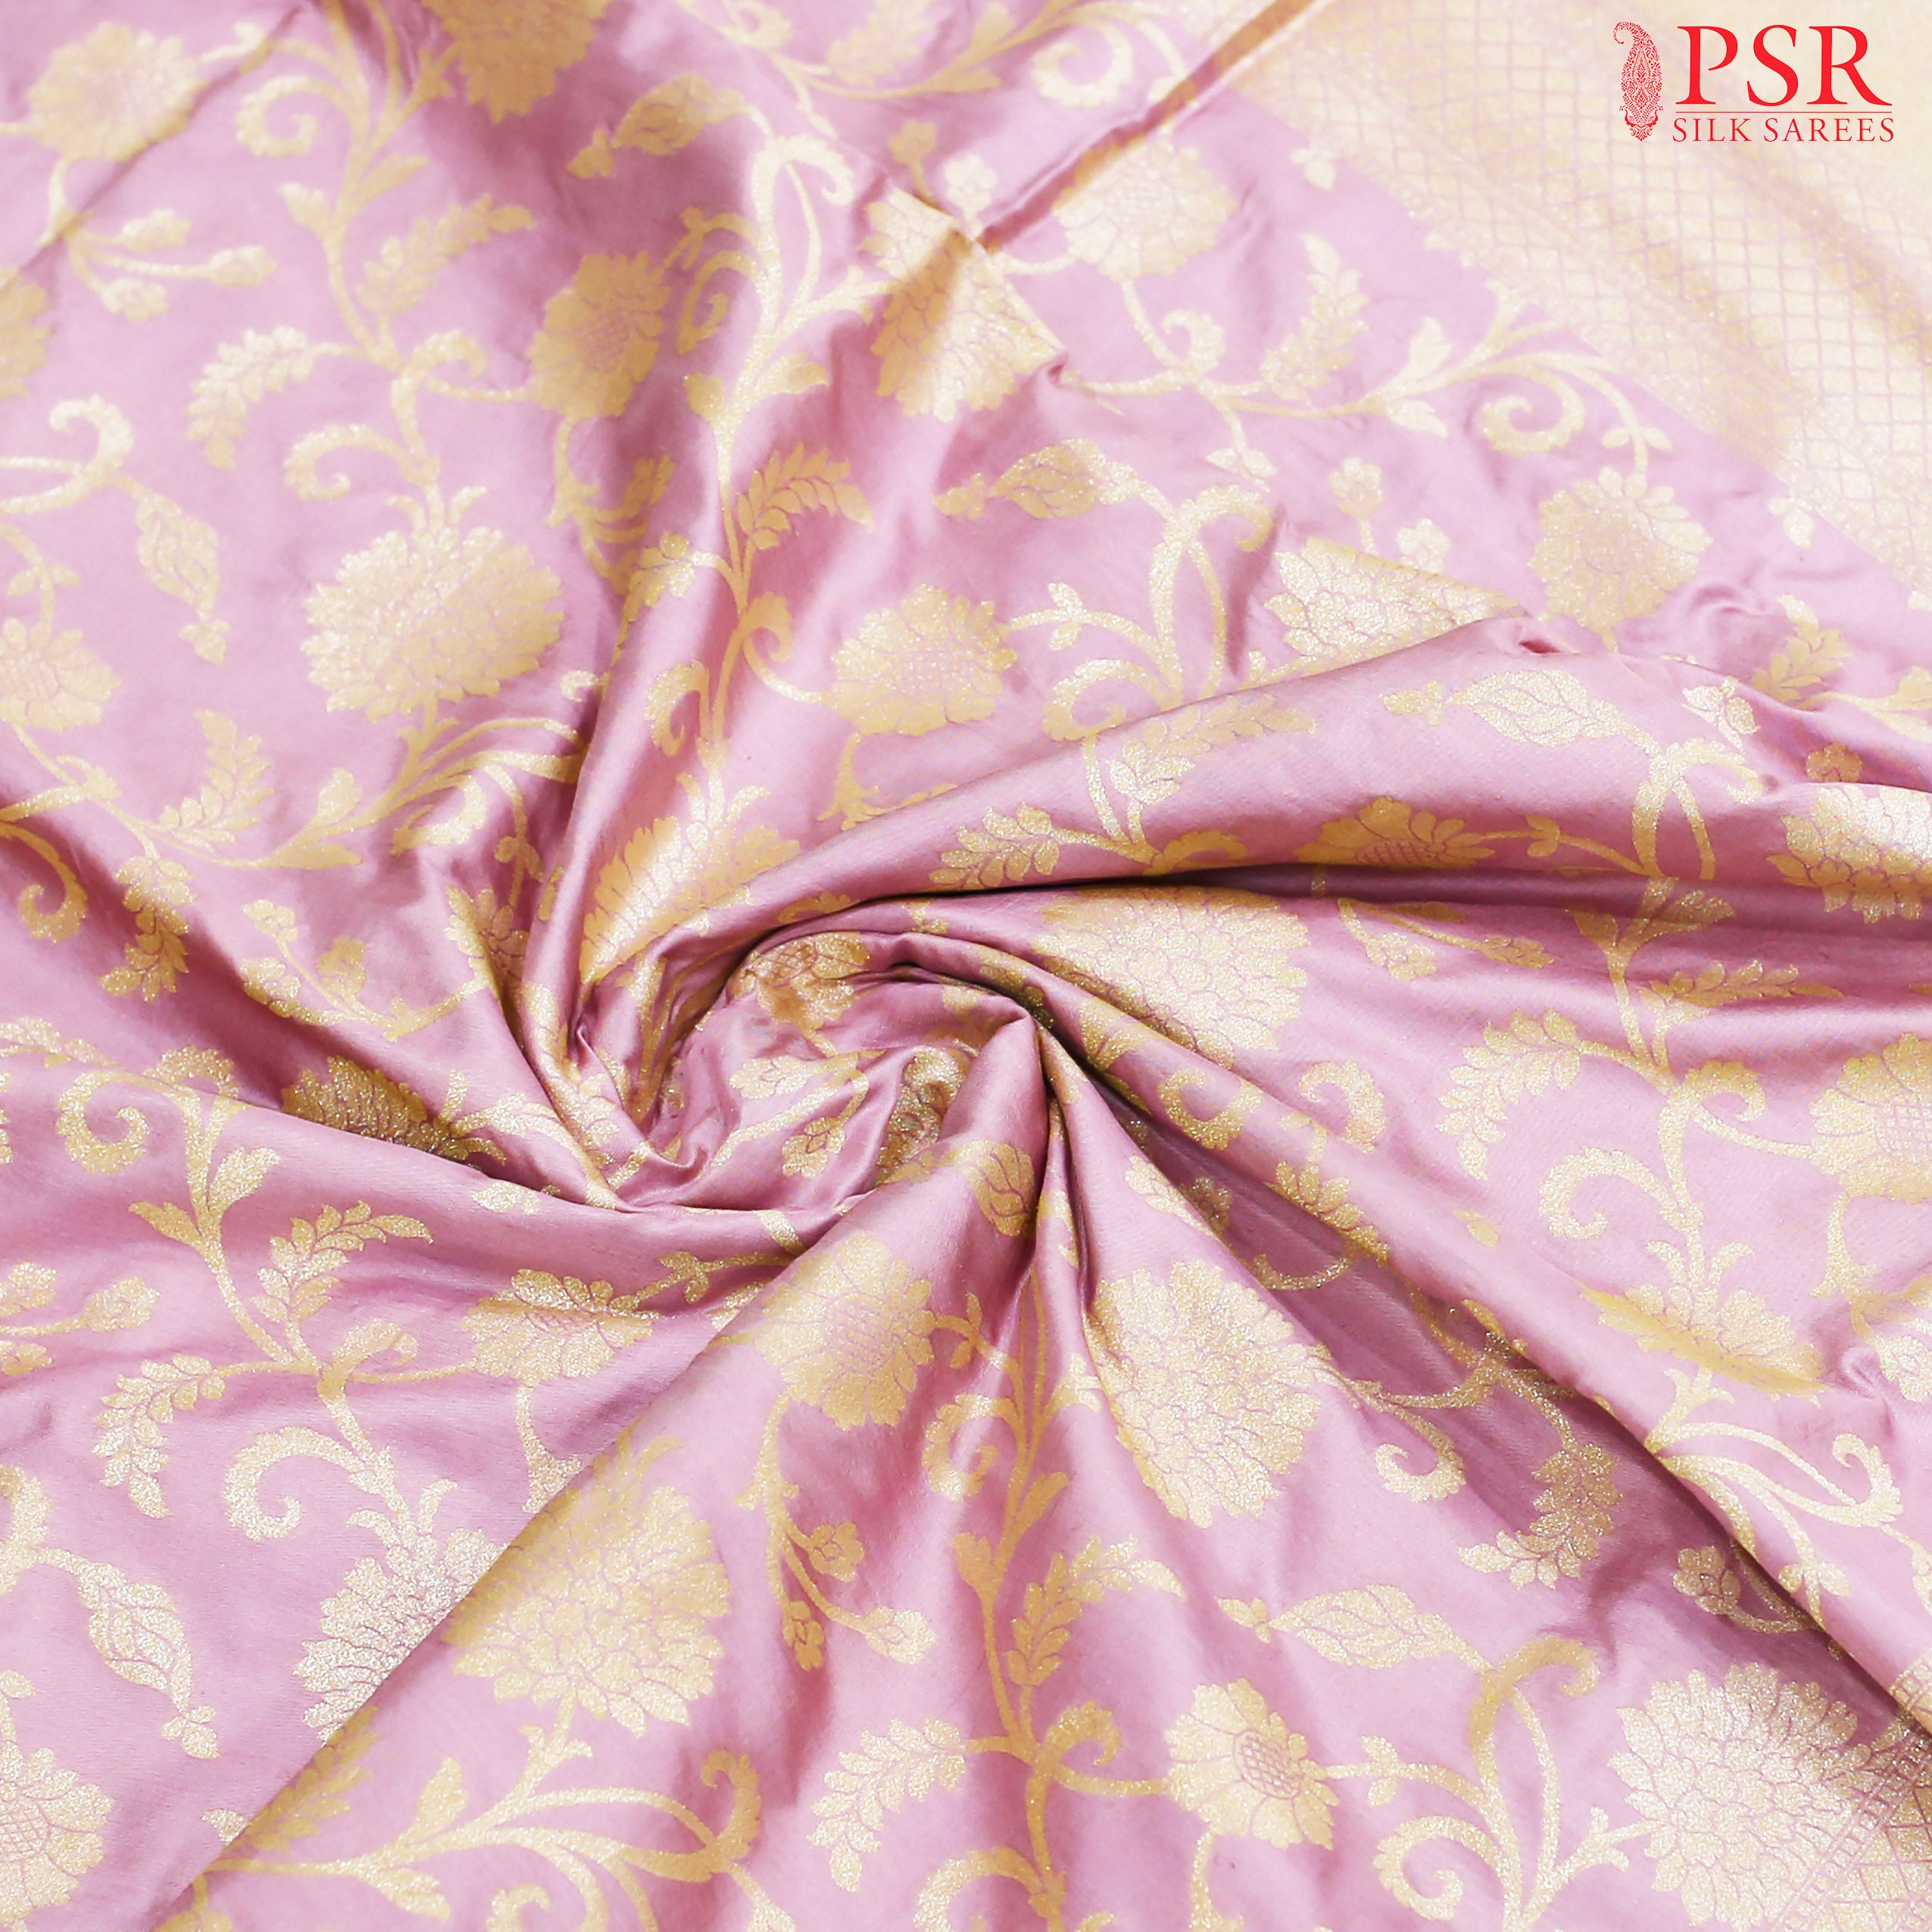 Pastel Taffy Pink Colored Banaras Silk Saree With Beautiful Neem Zari Work. The Scroll Floral Brocade Pattern And Rich Zari Work In Pallu Gives This Saree An Adorable Look.